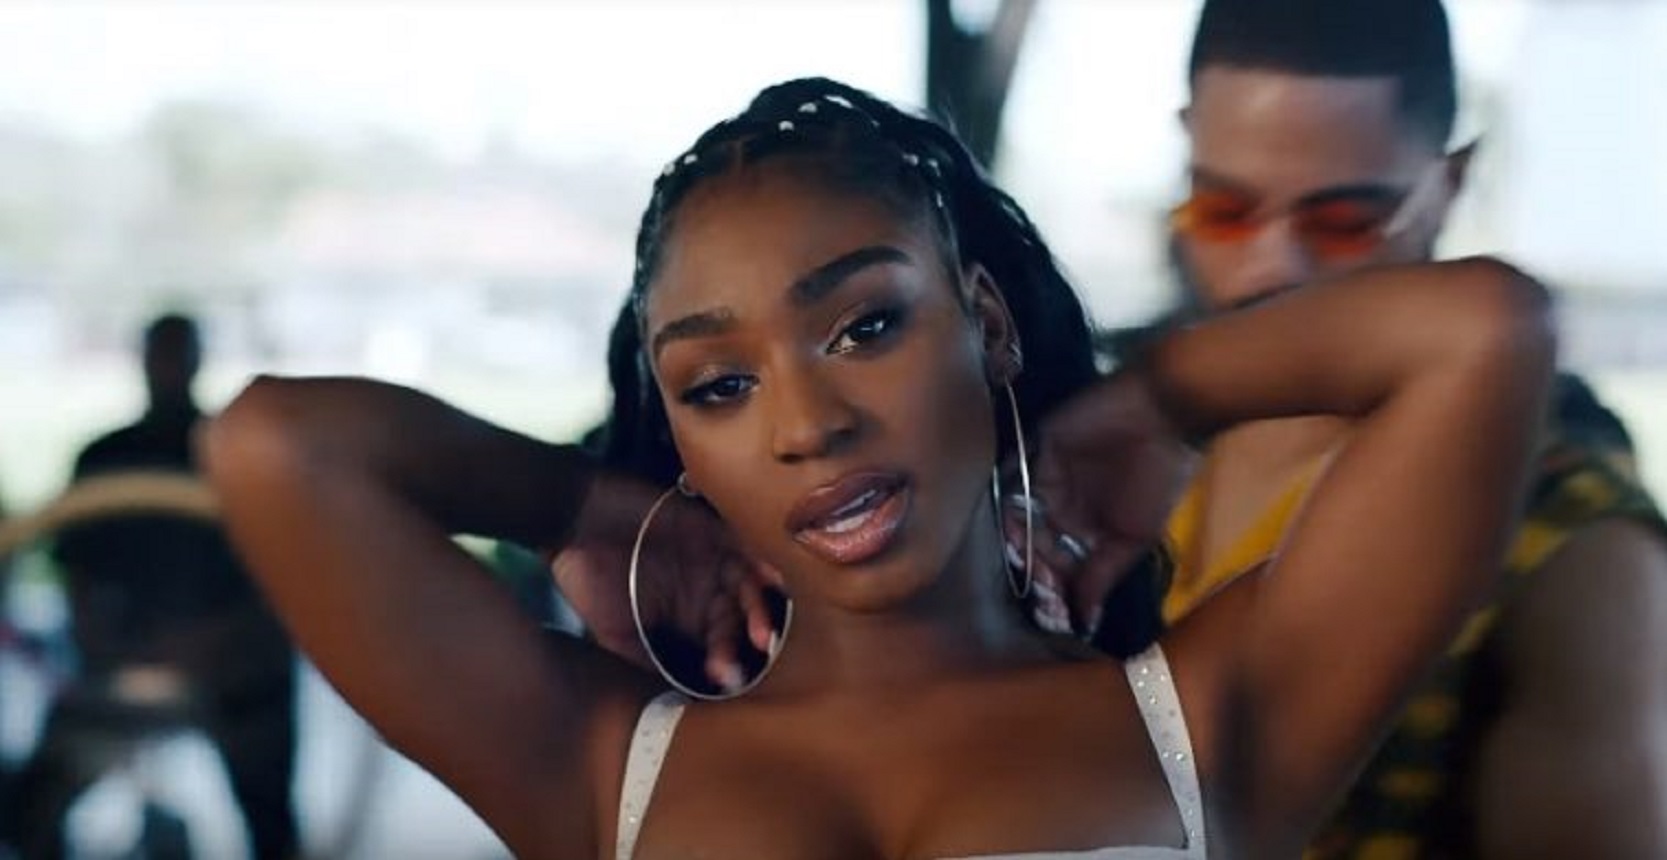 Normani – “I Have So Much To Offer Vocally”